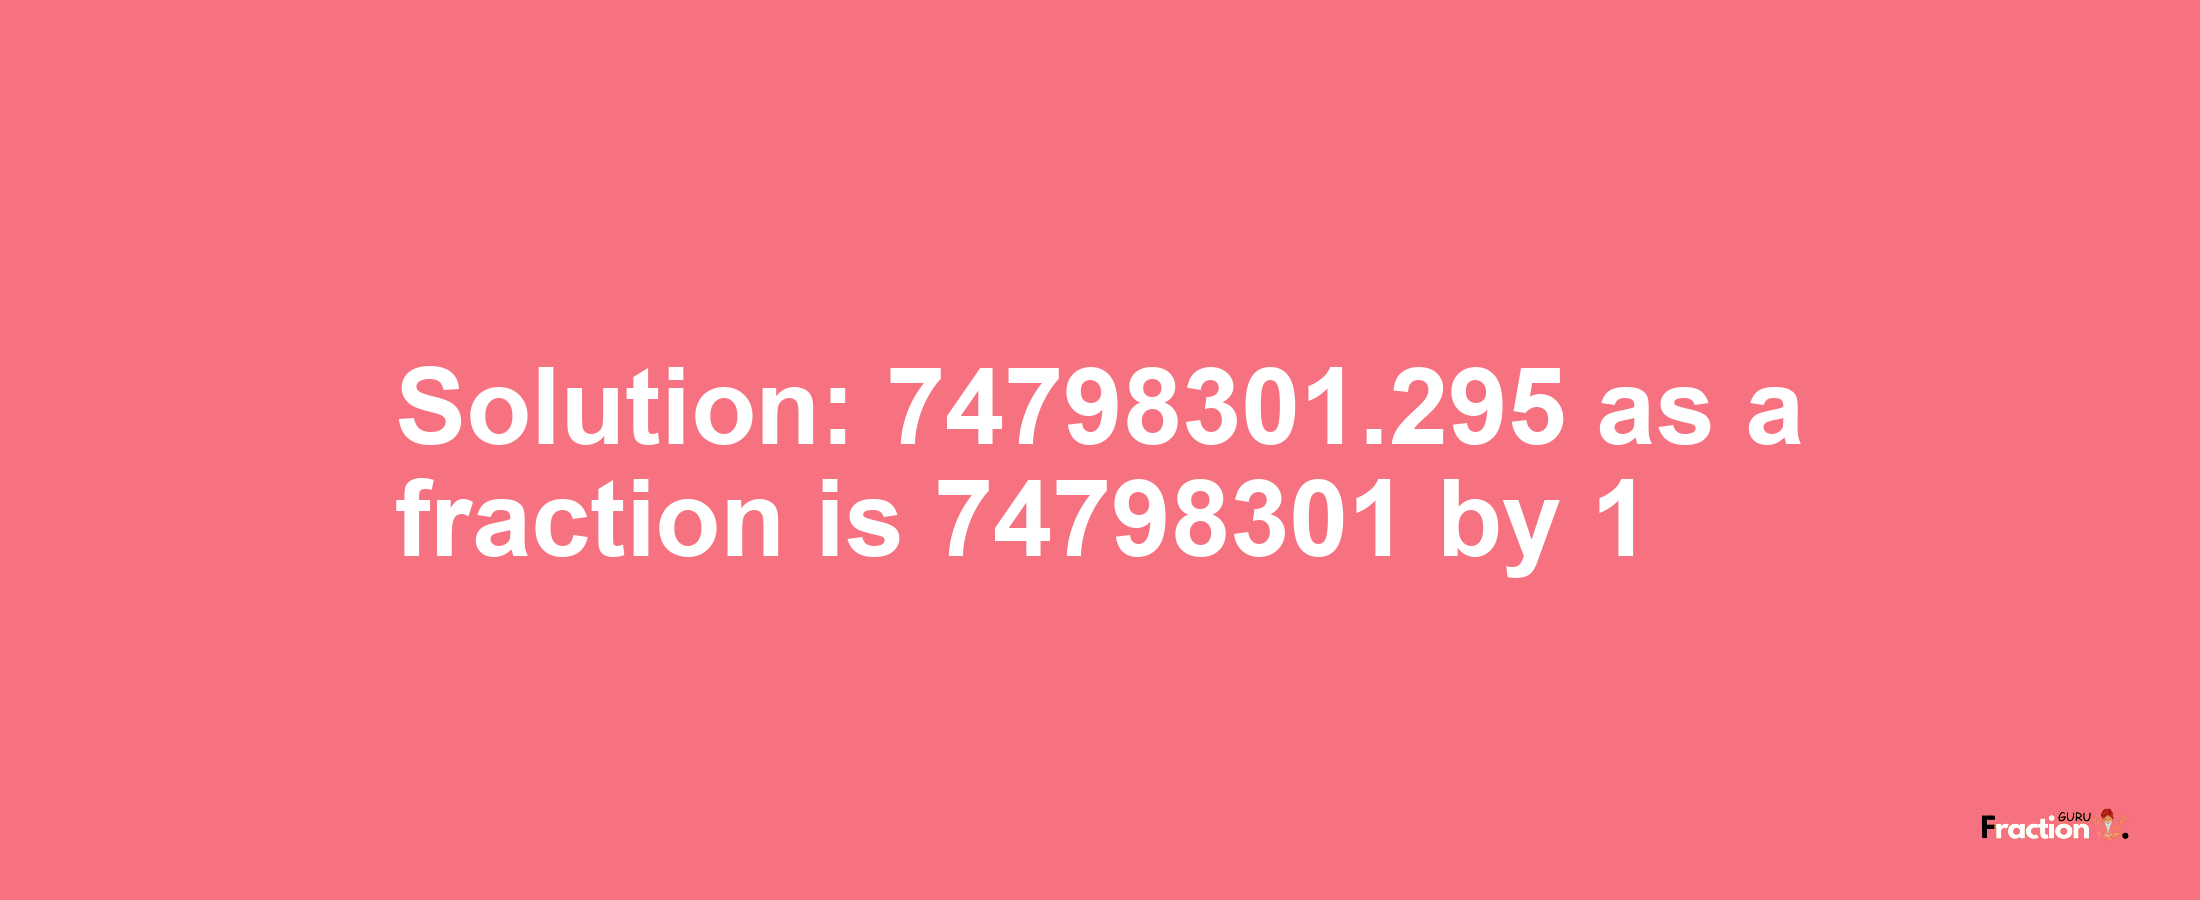 Solution:74798301.295 as a fraction is 74798301/1